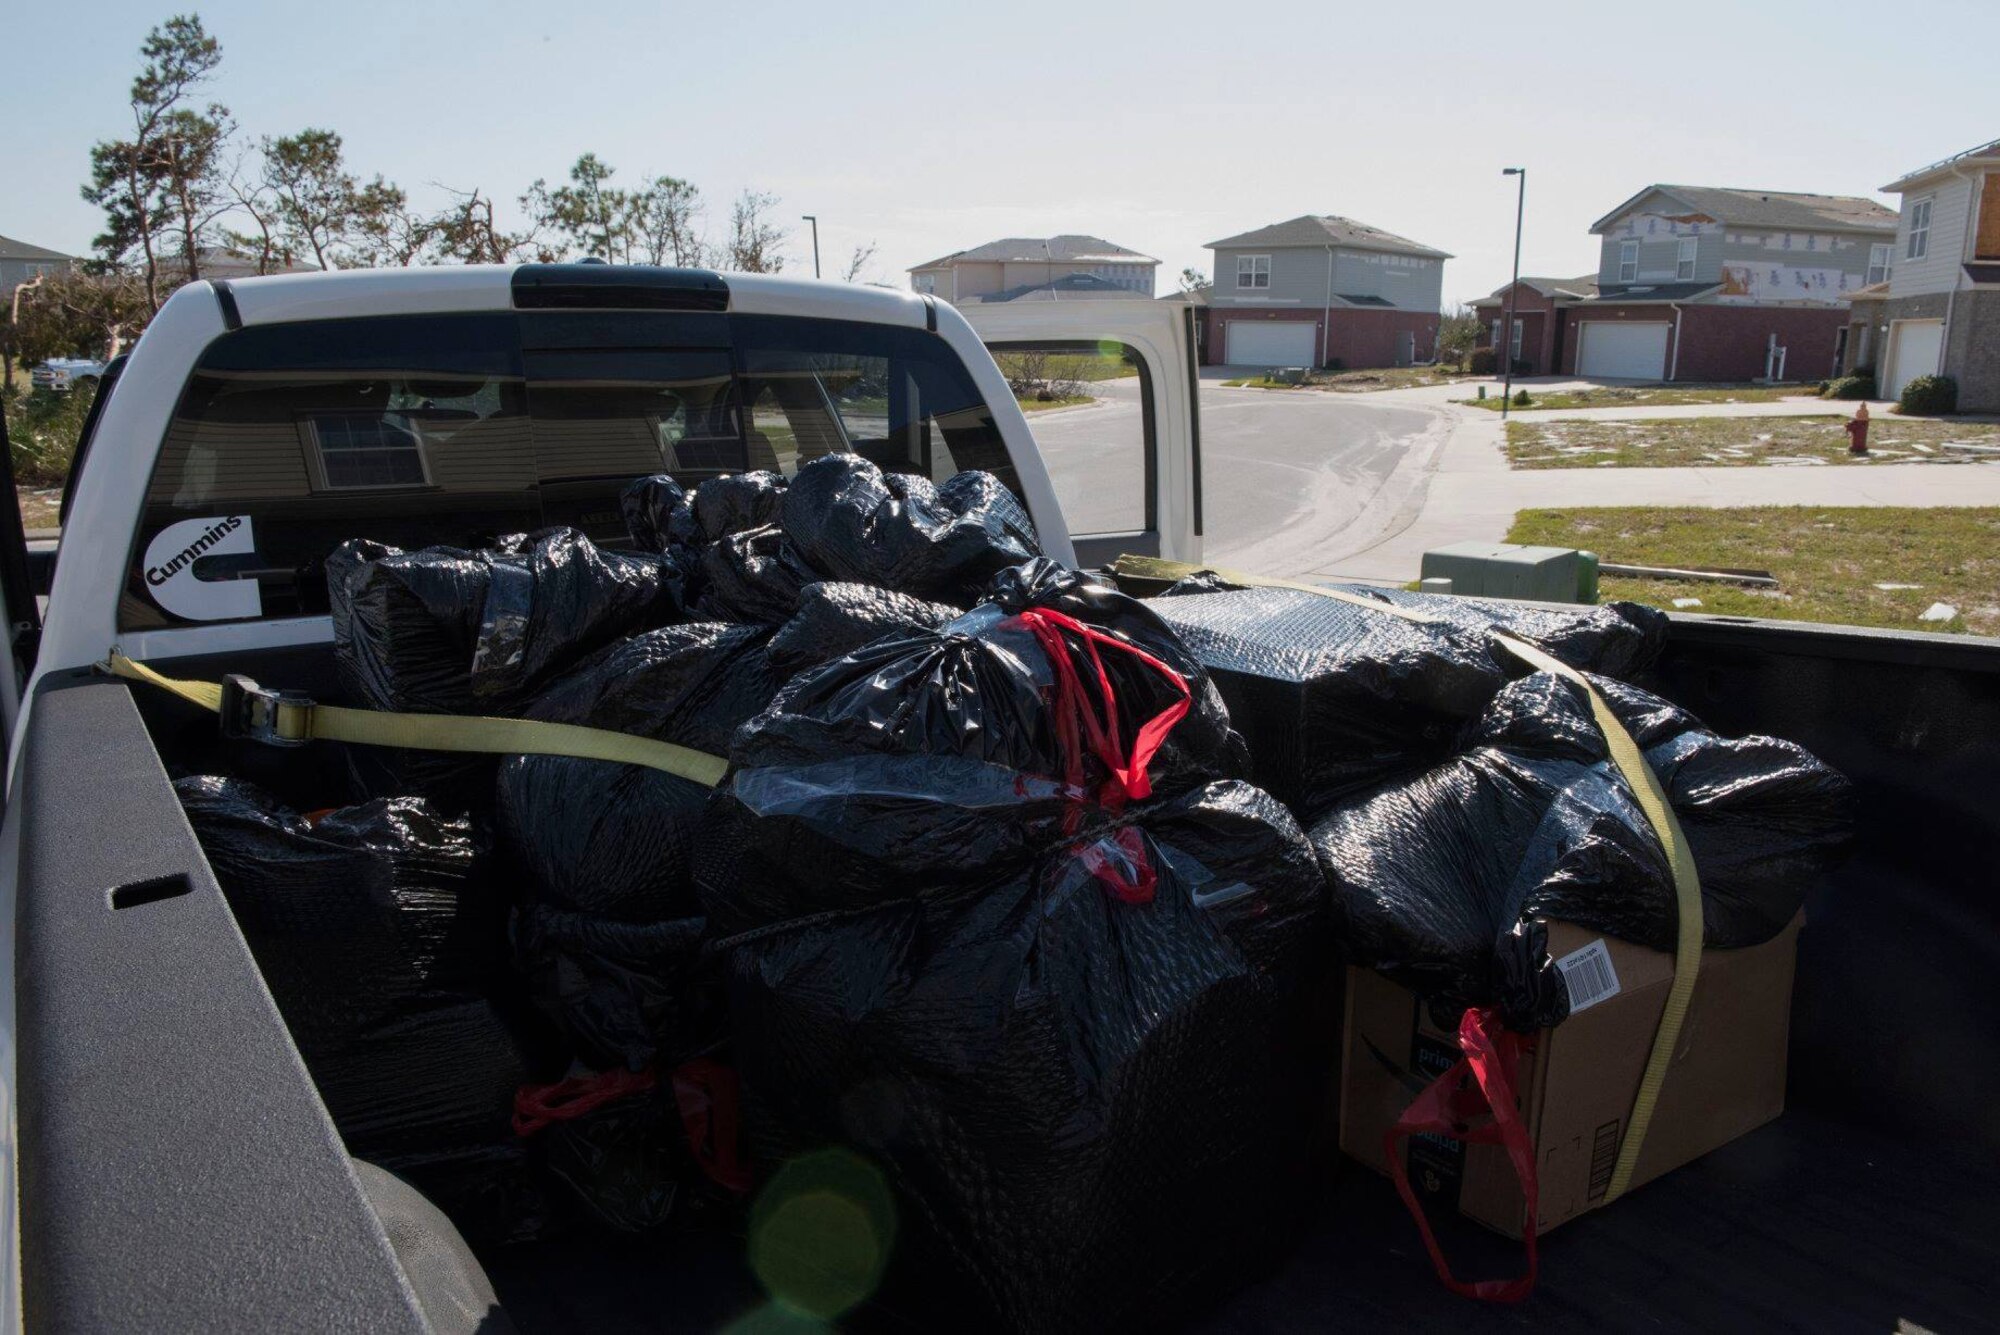 The Kriete family salvages their personal belongings, at Tyndall Air Force Base, Fla., Oct. 19, 2018. Tyndall AFB was damaged by Hurricane Michael which displaced approximately 11,000 people, to include the Kriete family who travelled back to Tyndall during a five hour window to recover their belongings.